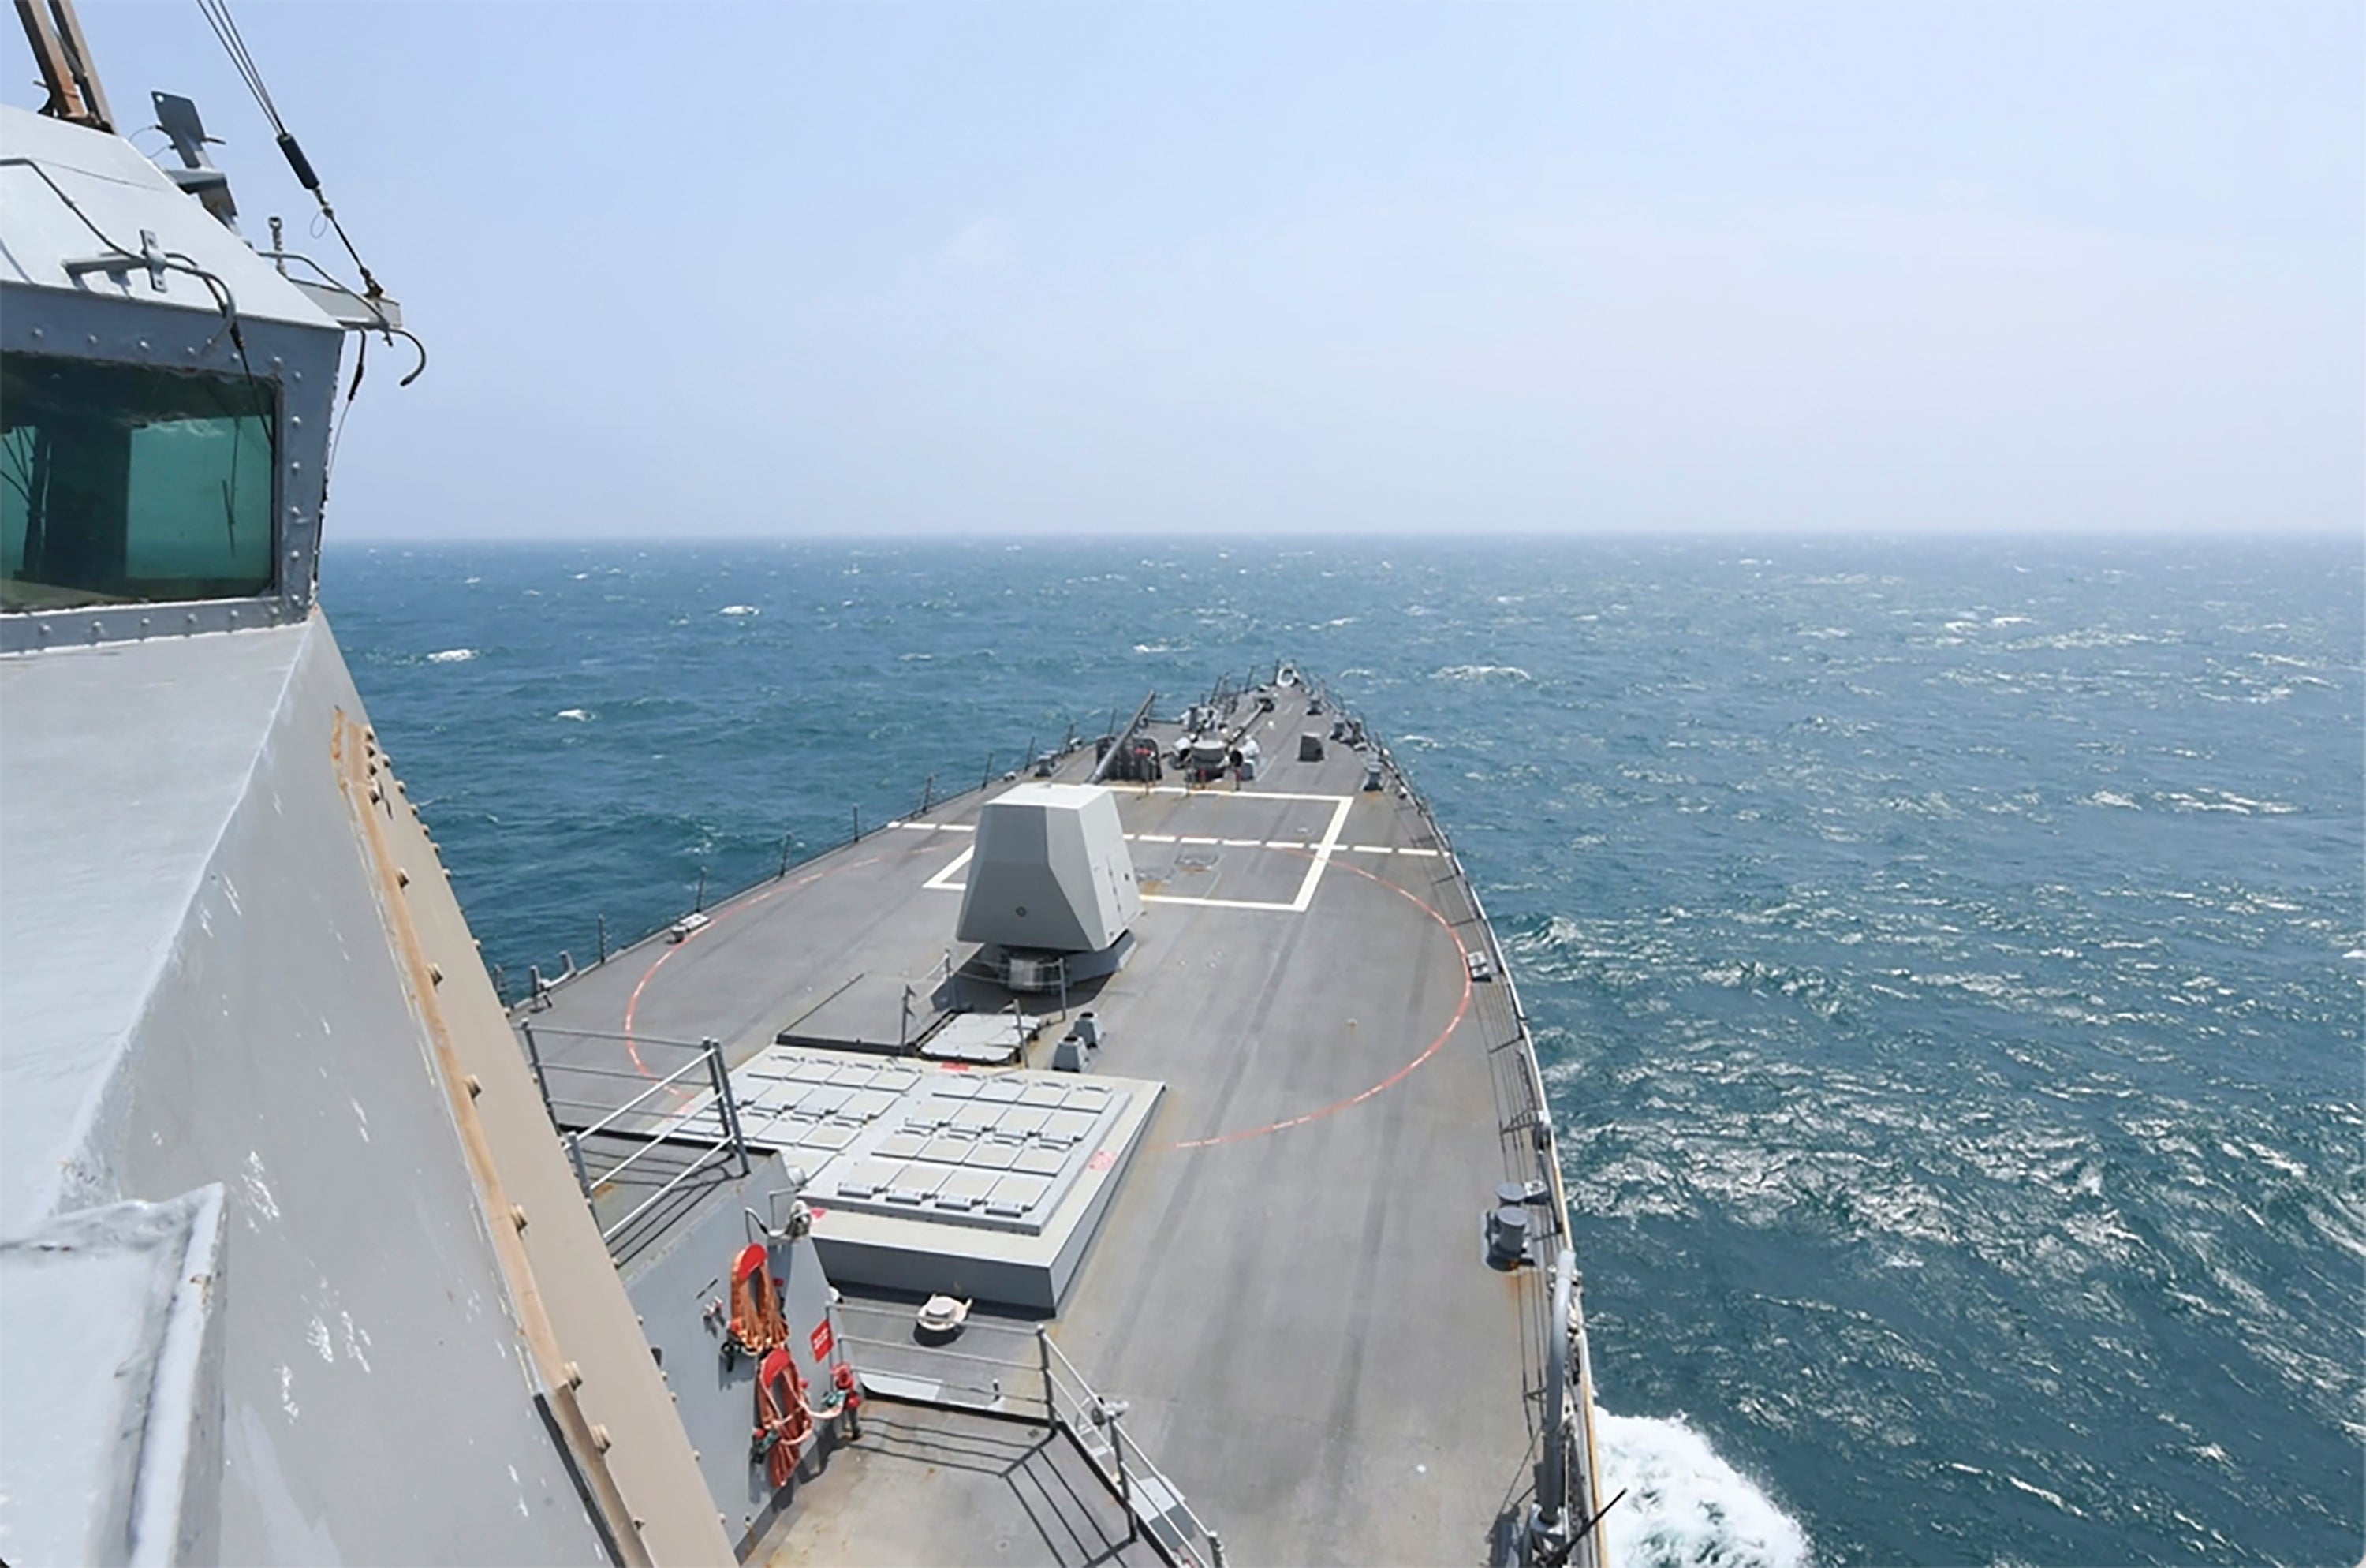 In this photo provided by the U.S. Navy, the Arleigh Burke-class guided-missile destroyer USS Halsey (DDG 97) conducts routine underway operations while transiting through the Taiwan Strait